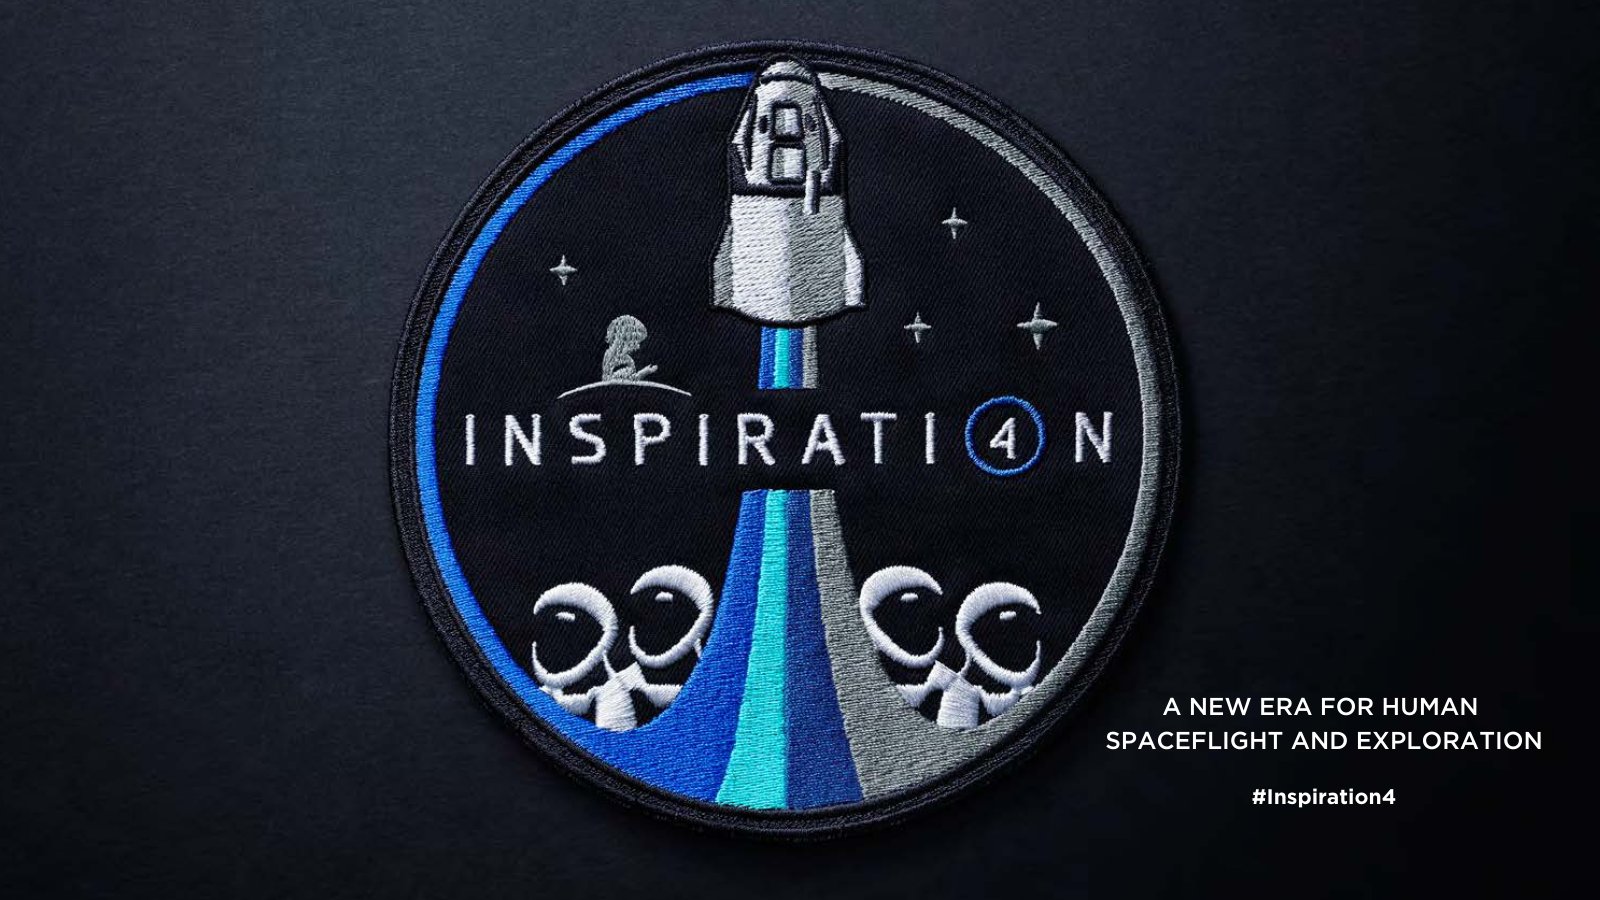 SpaceX's First All-Civilian Mission Inspiration4 will be a TIME Documentary